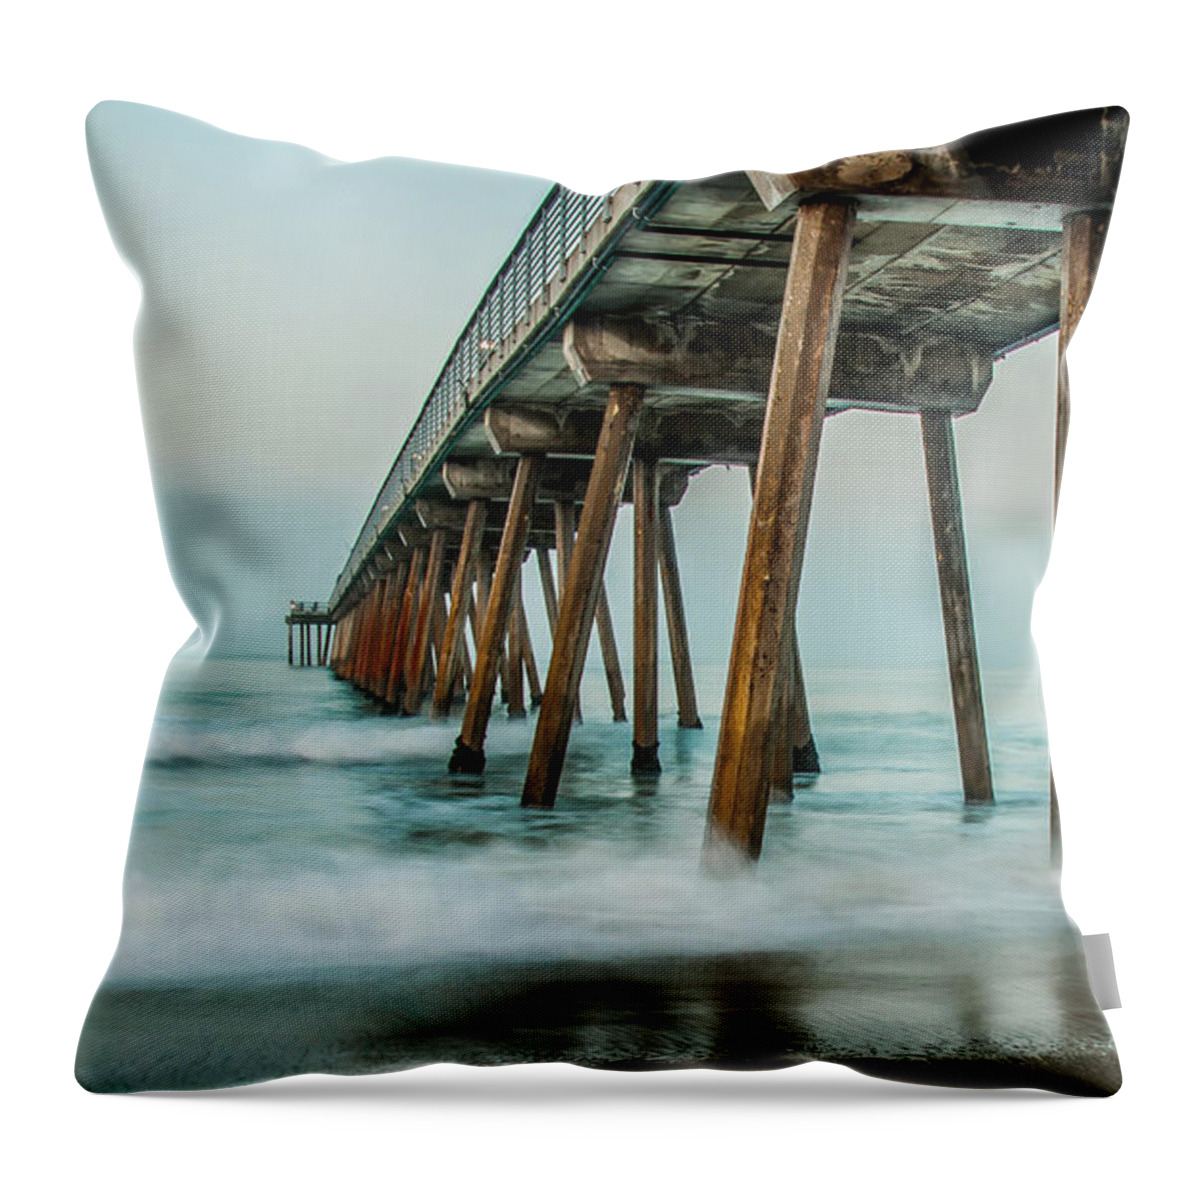 Pier Throw Pillow featuring the photograph Pier by Bill Carson Photography